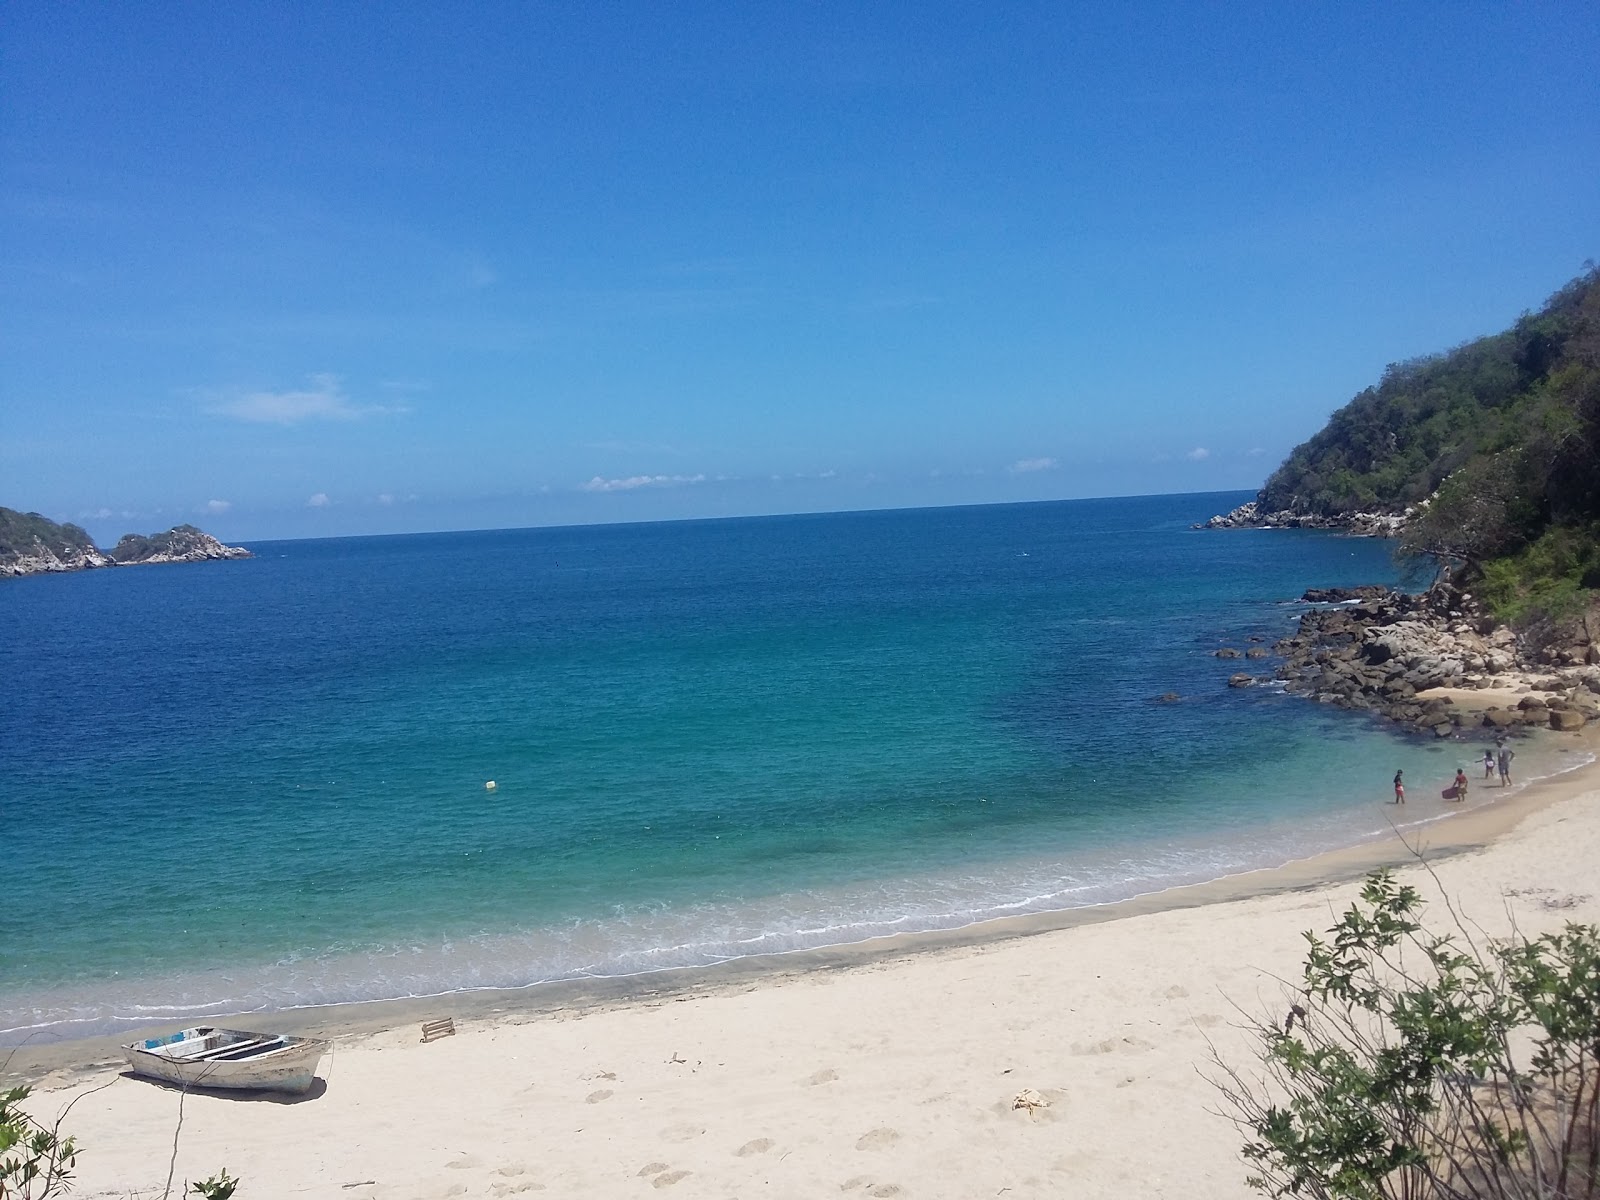 Photo of Corrales beach and its beautiful scenery